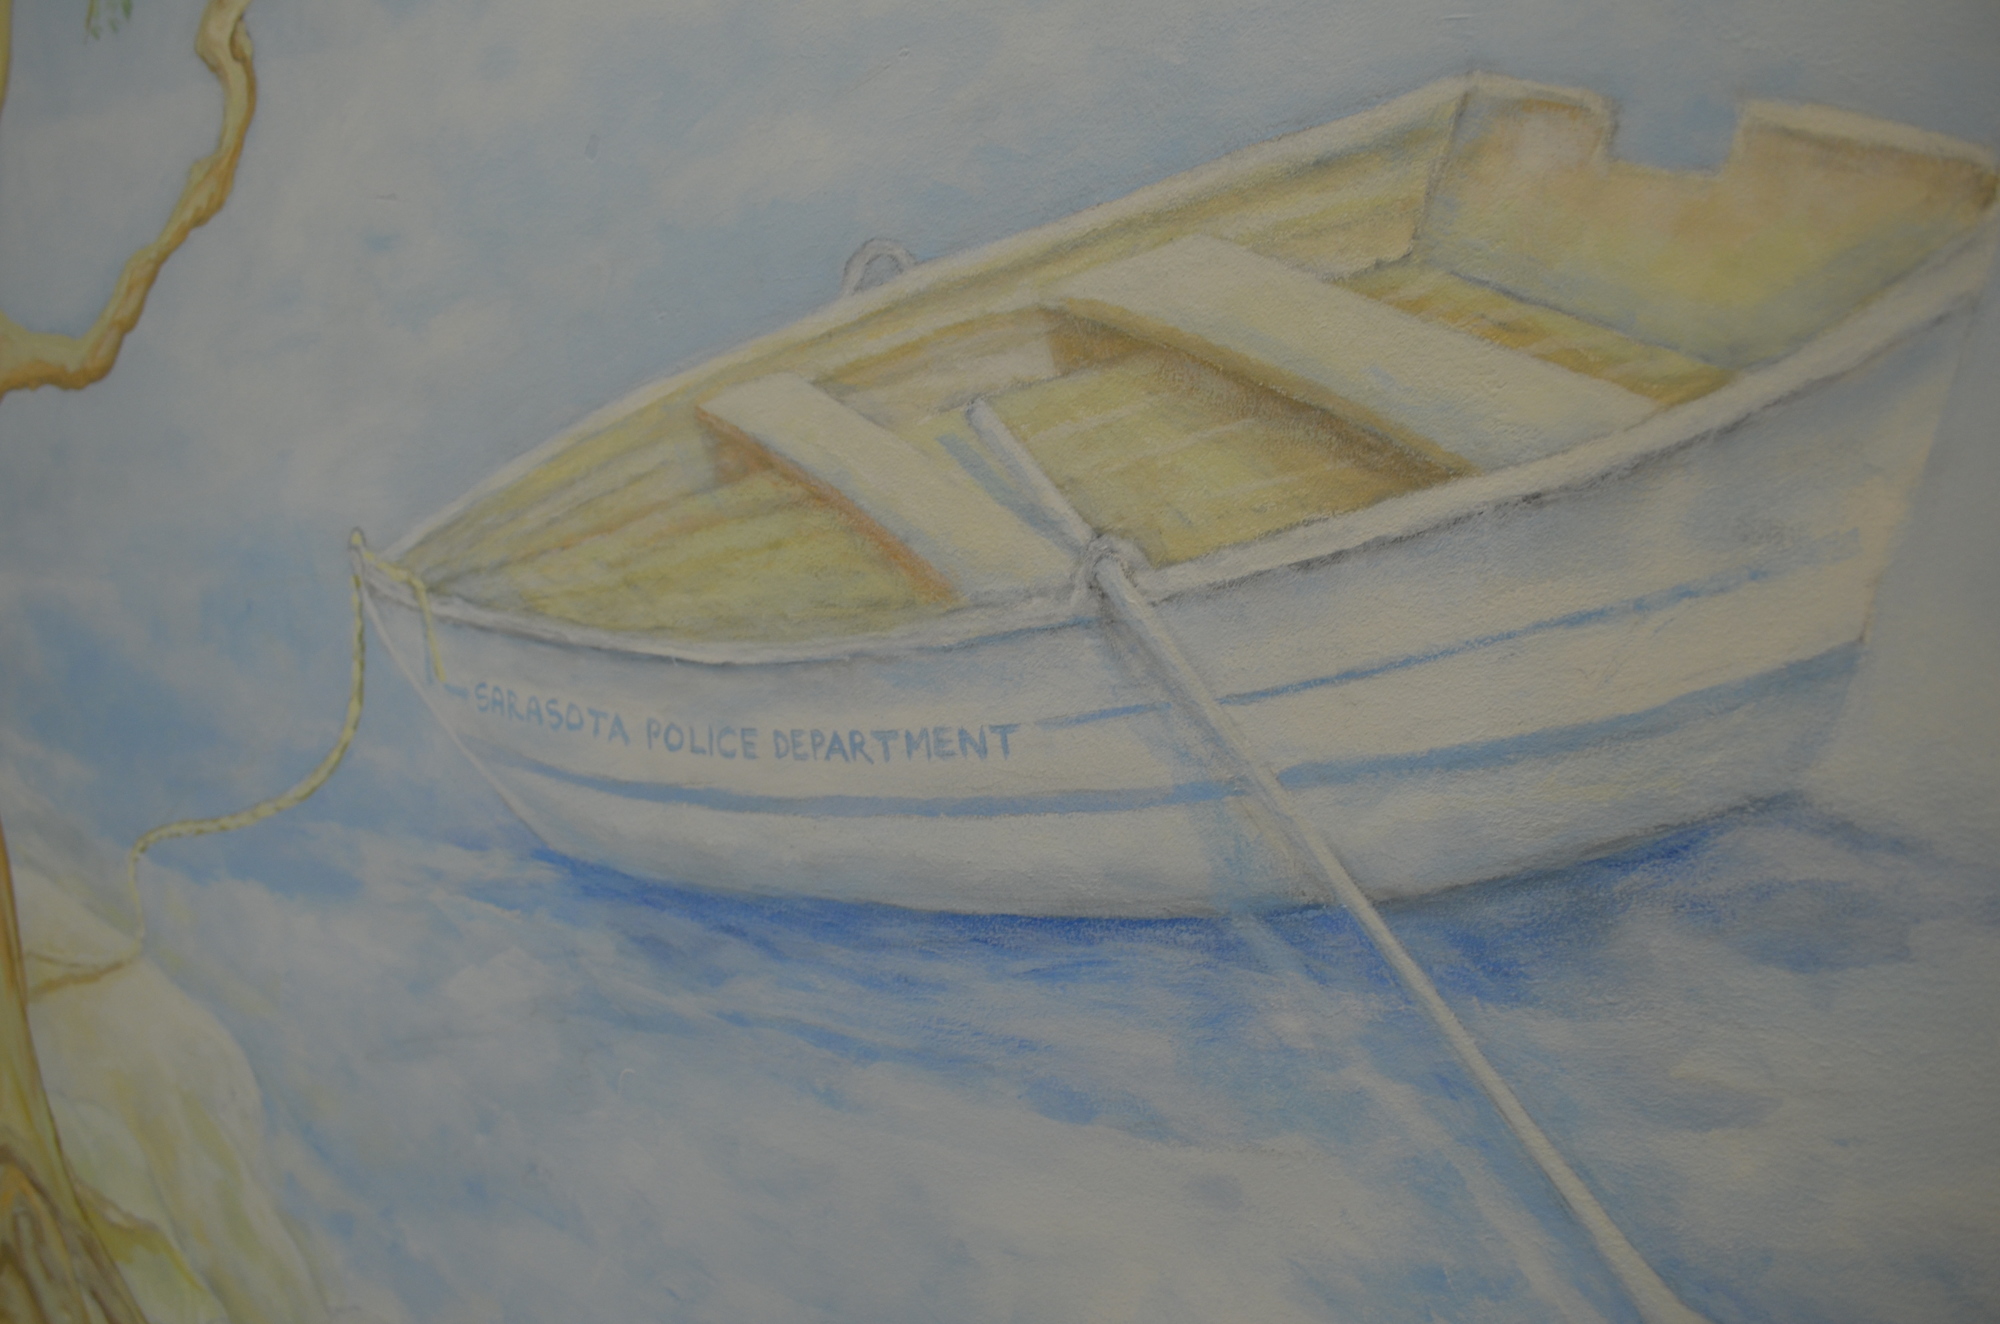 A sailboat is featured in the mural by Joe Cuffaro.